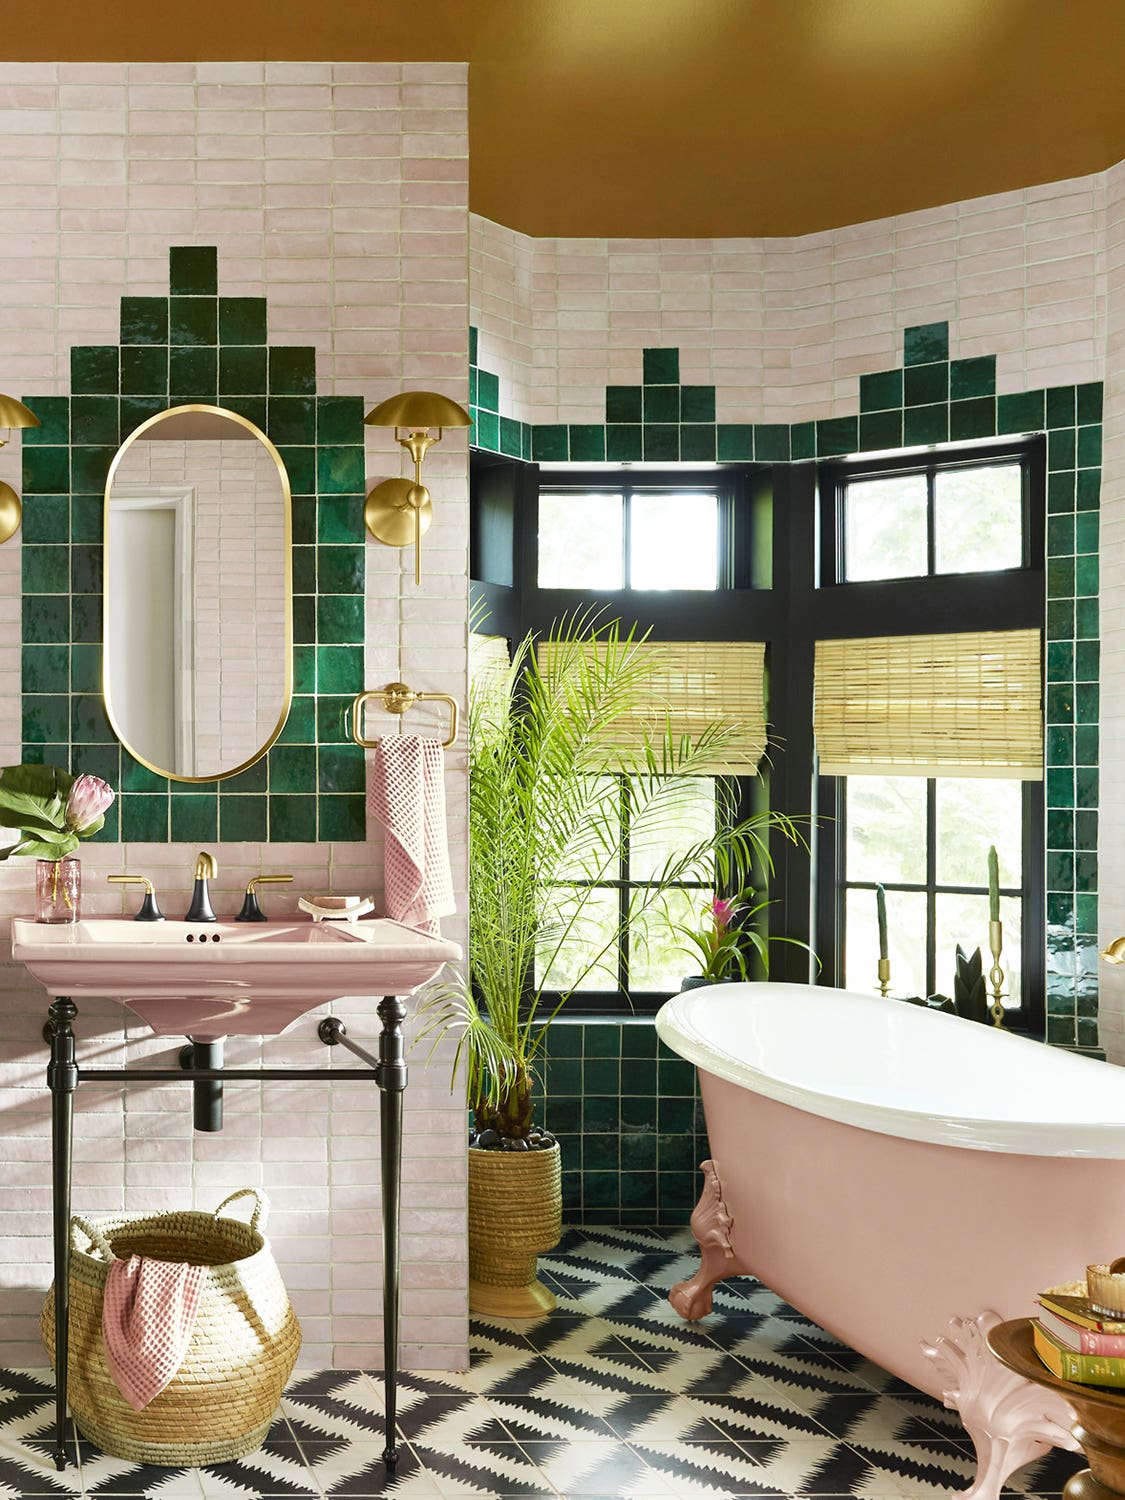 Justina Blakeney Makes This Once-Dated Bathroom Fixture Look Cool Again